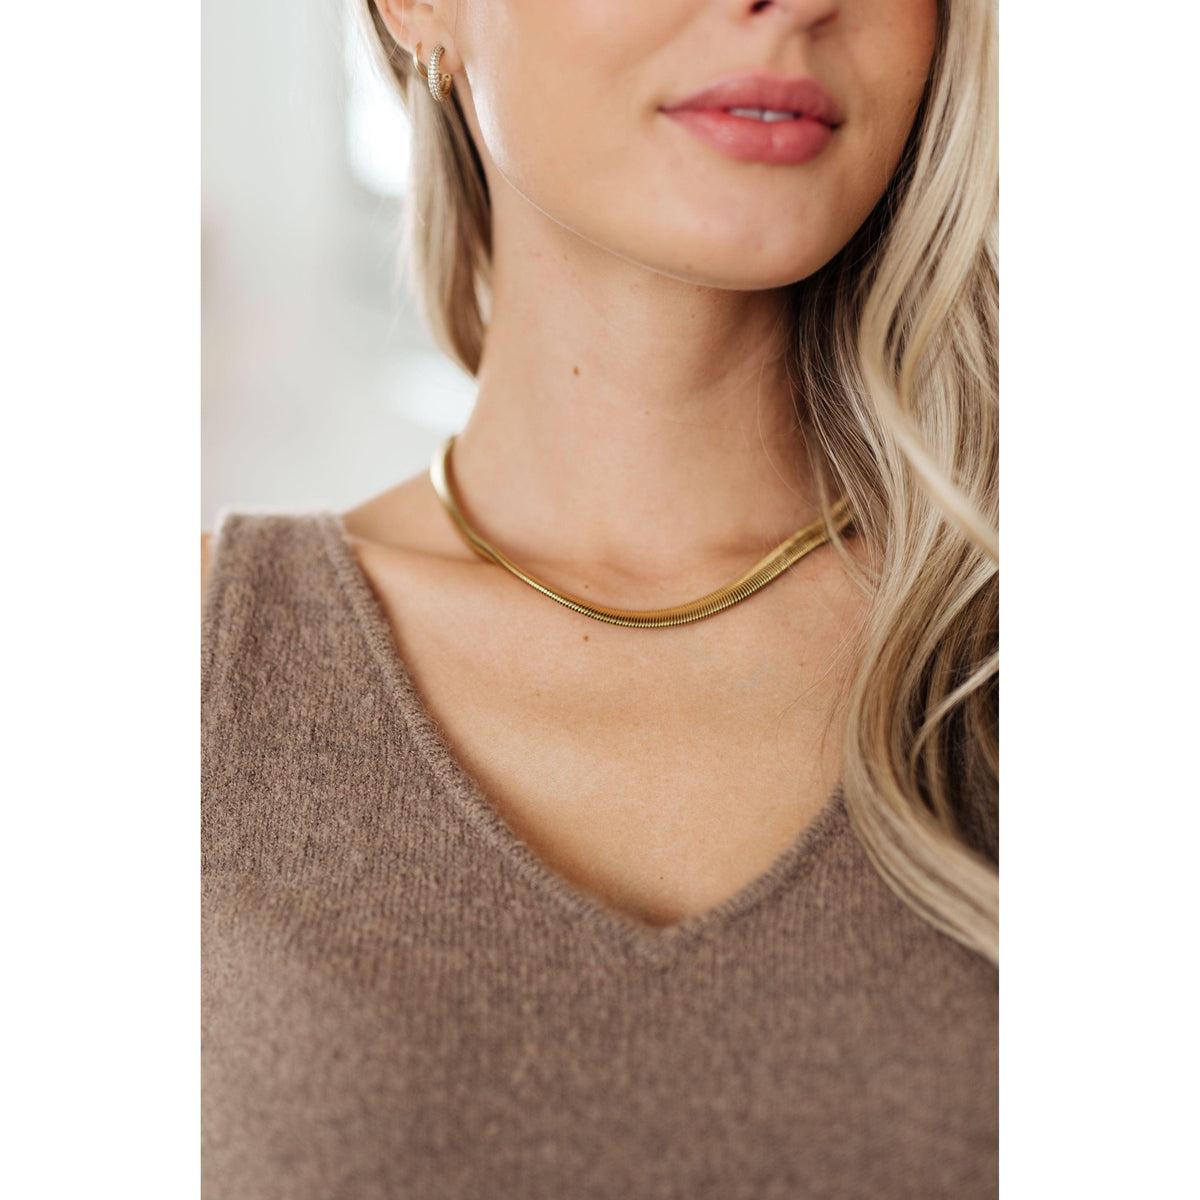 Enlighten Me Gold Plated Chain Necklace - becauseofadi